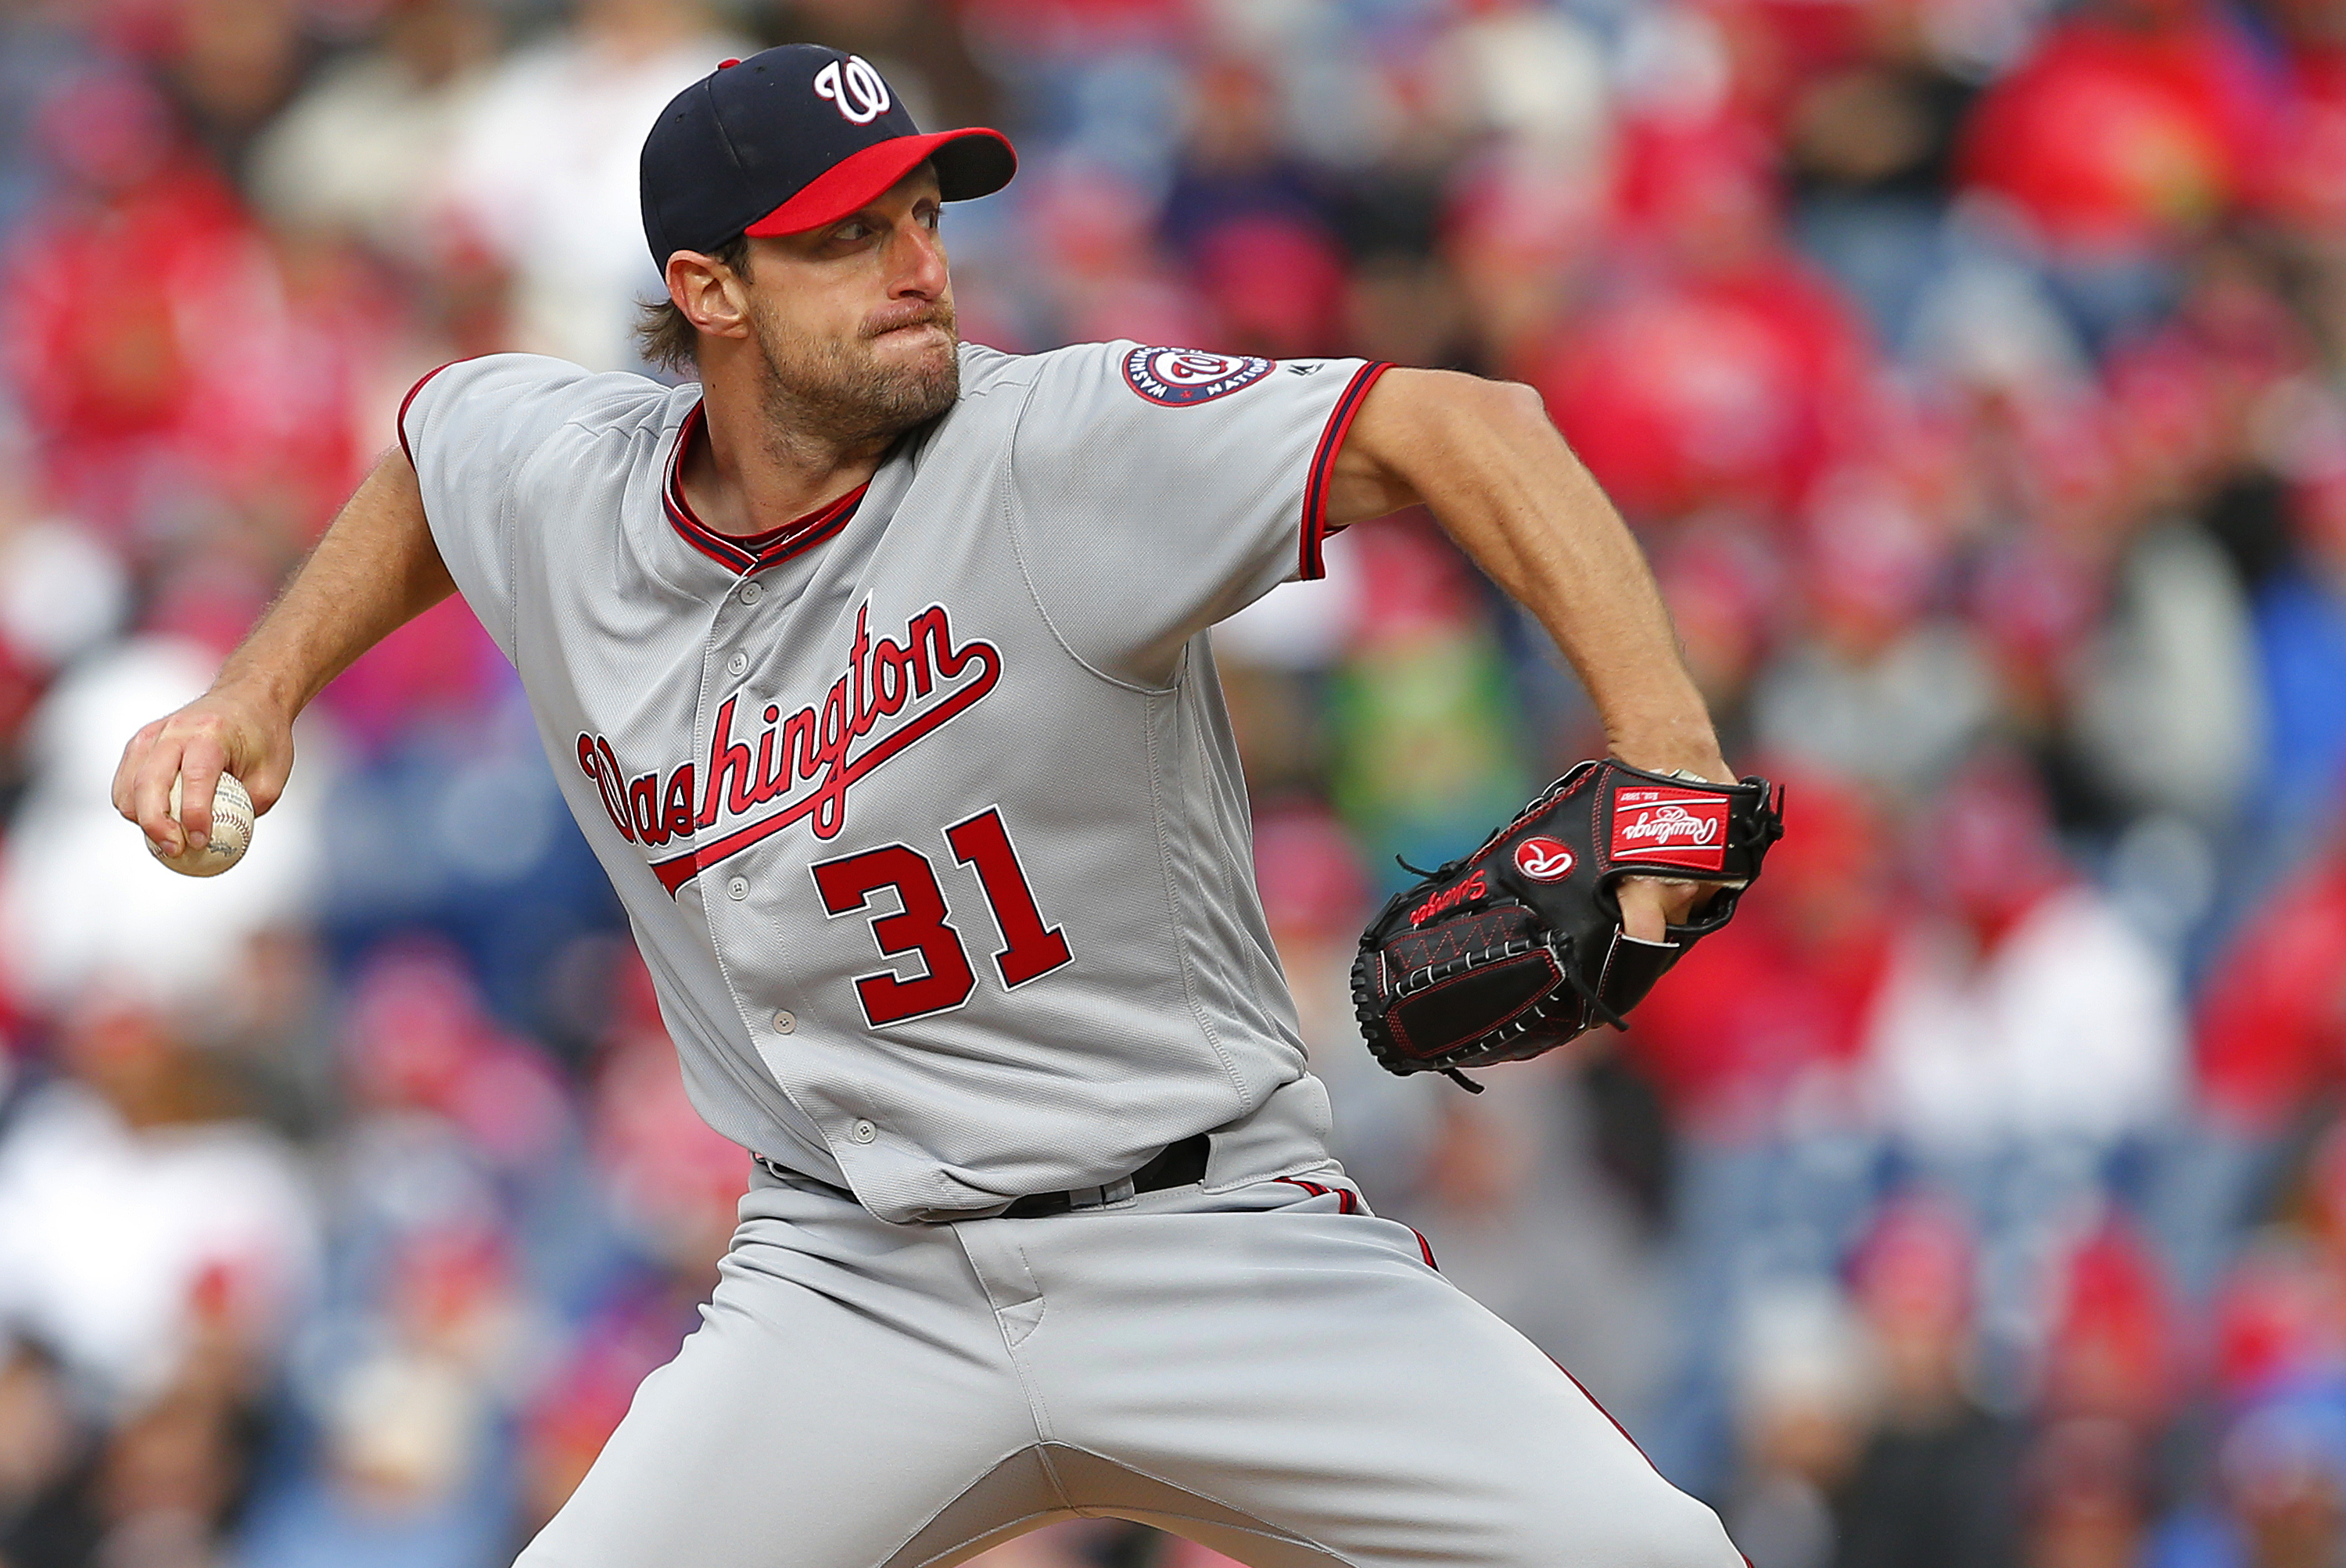 Nationals' Max Scherzer exits with injury after 12 pitches